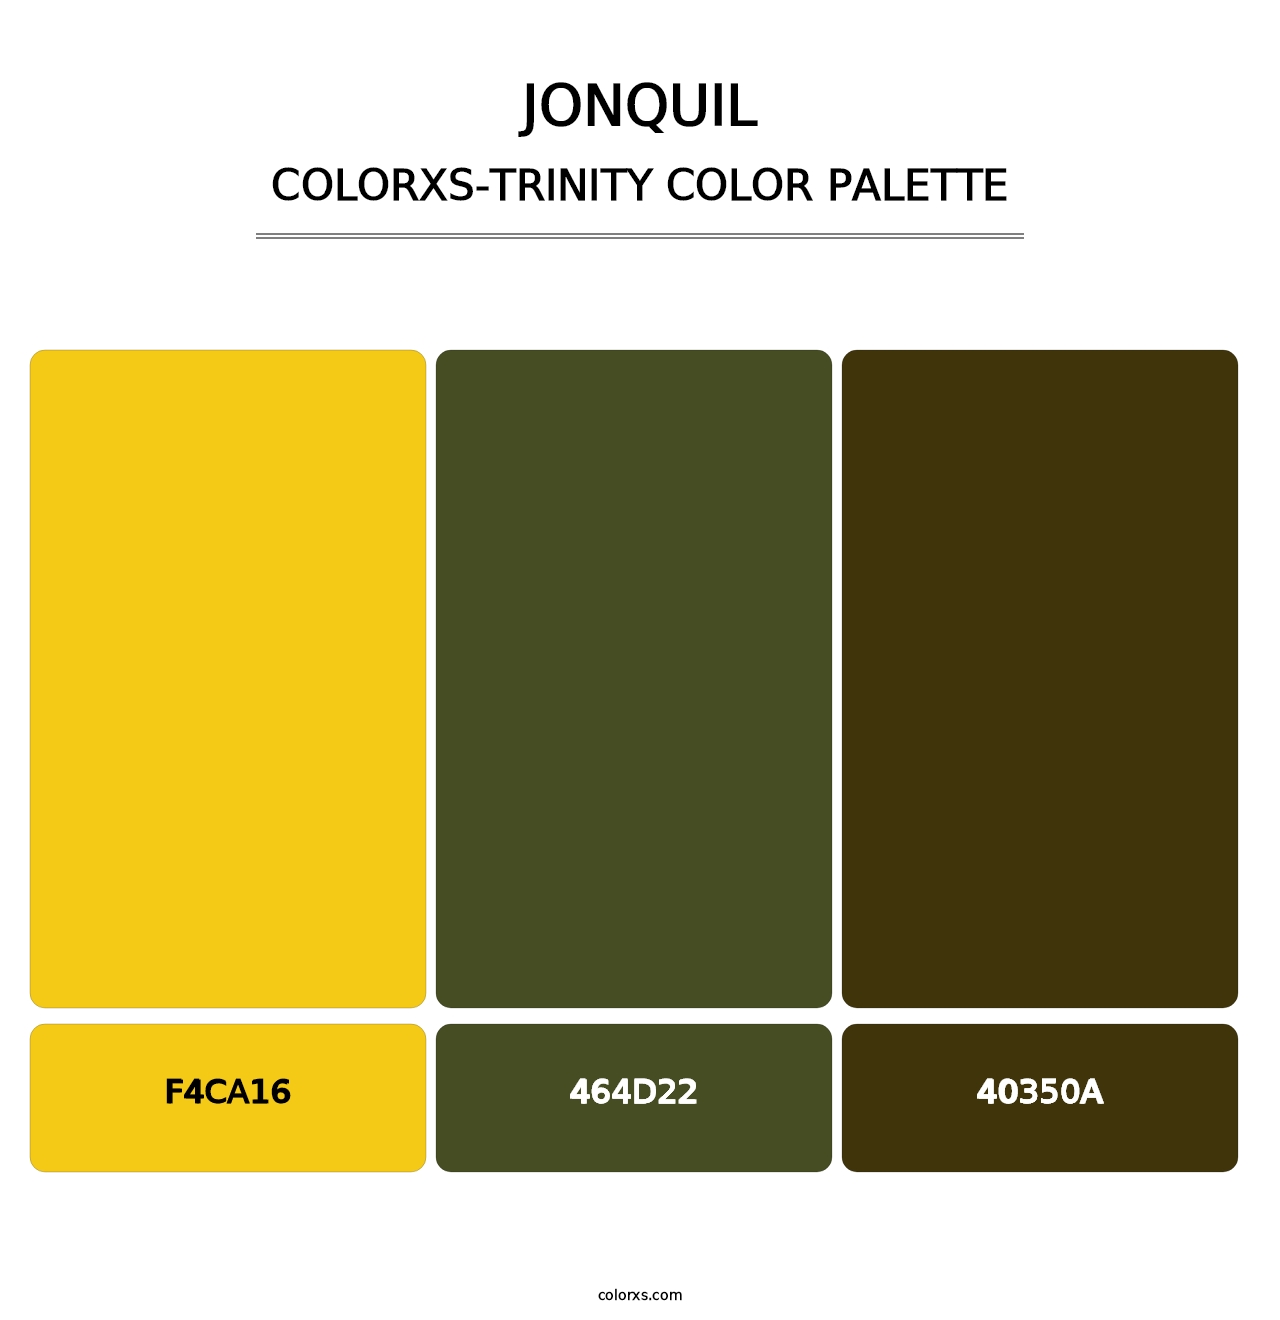 Jonquil - Colorxs Trinity Palette